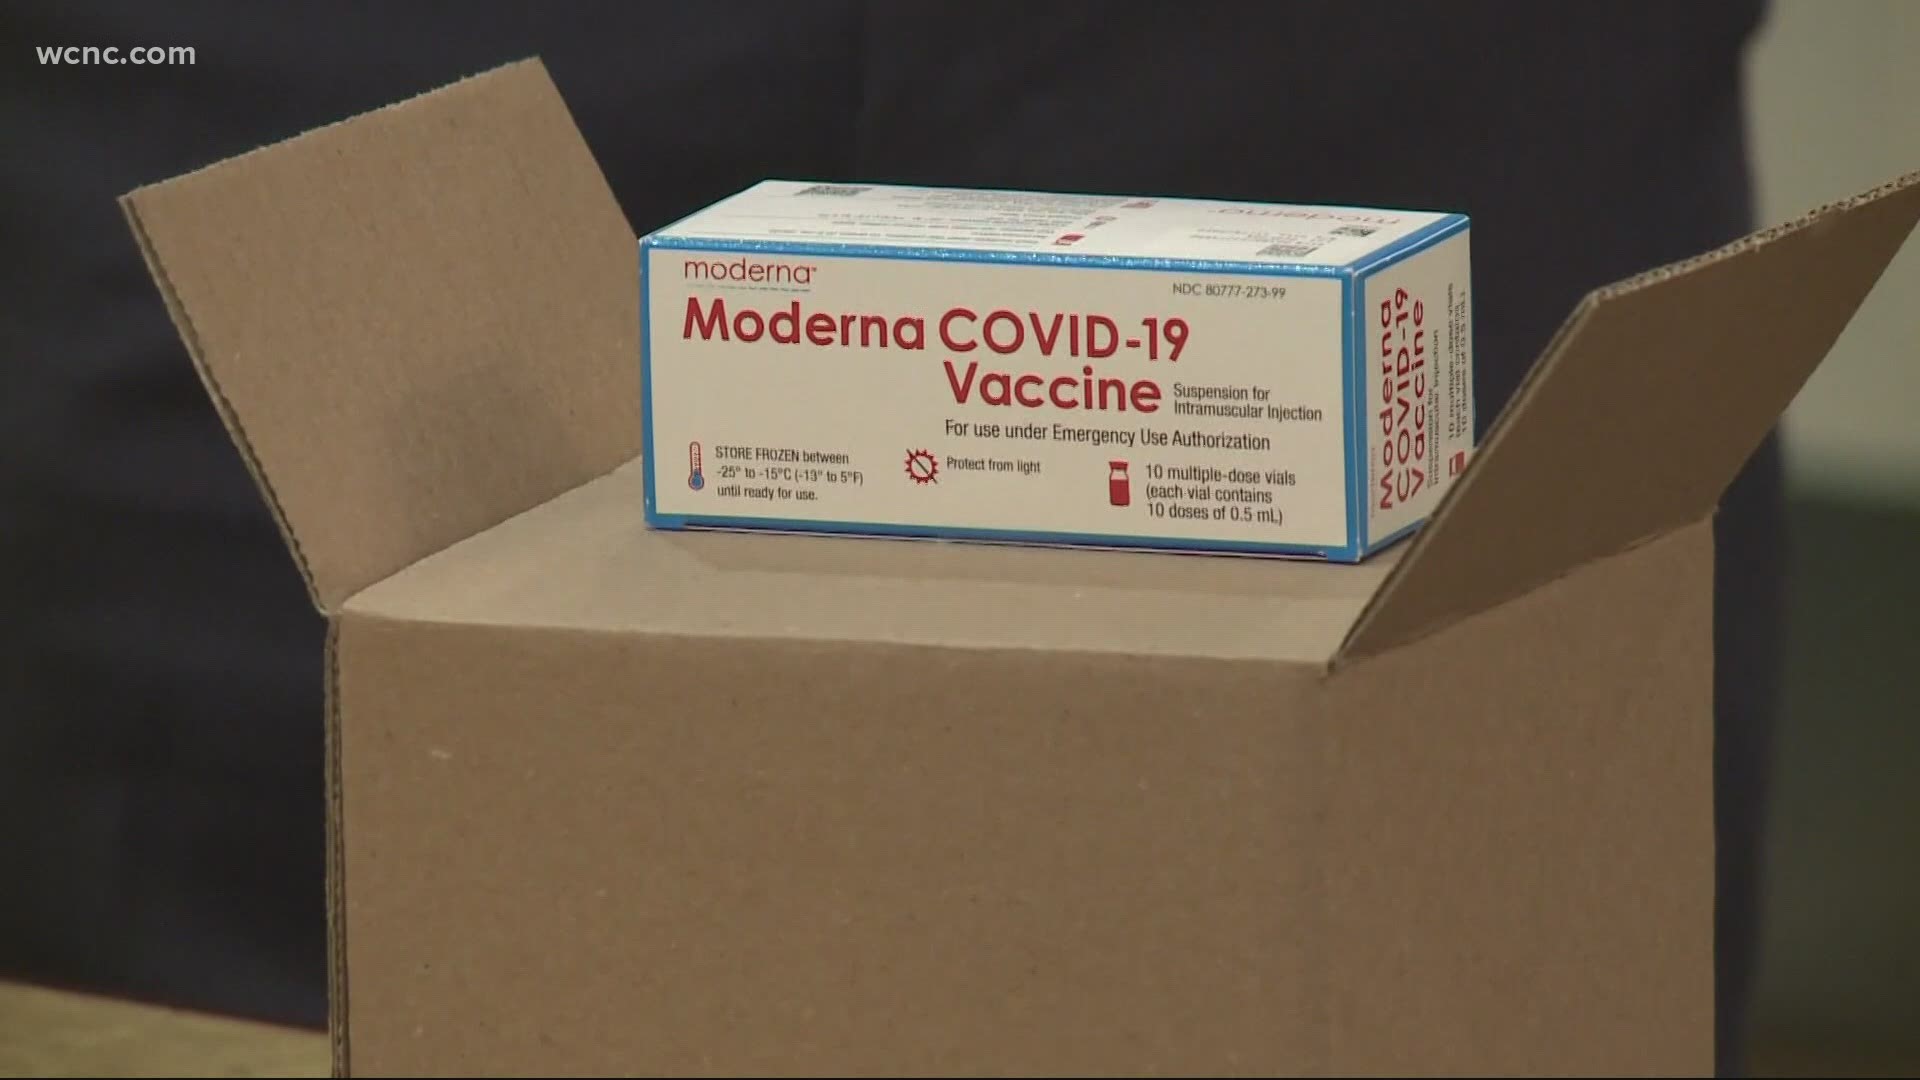 More people in Mecklenburg County will soon be able to get the COVID-19 vaccine as adults 65 and older can schedule appointments for vaccination.